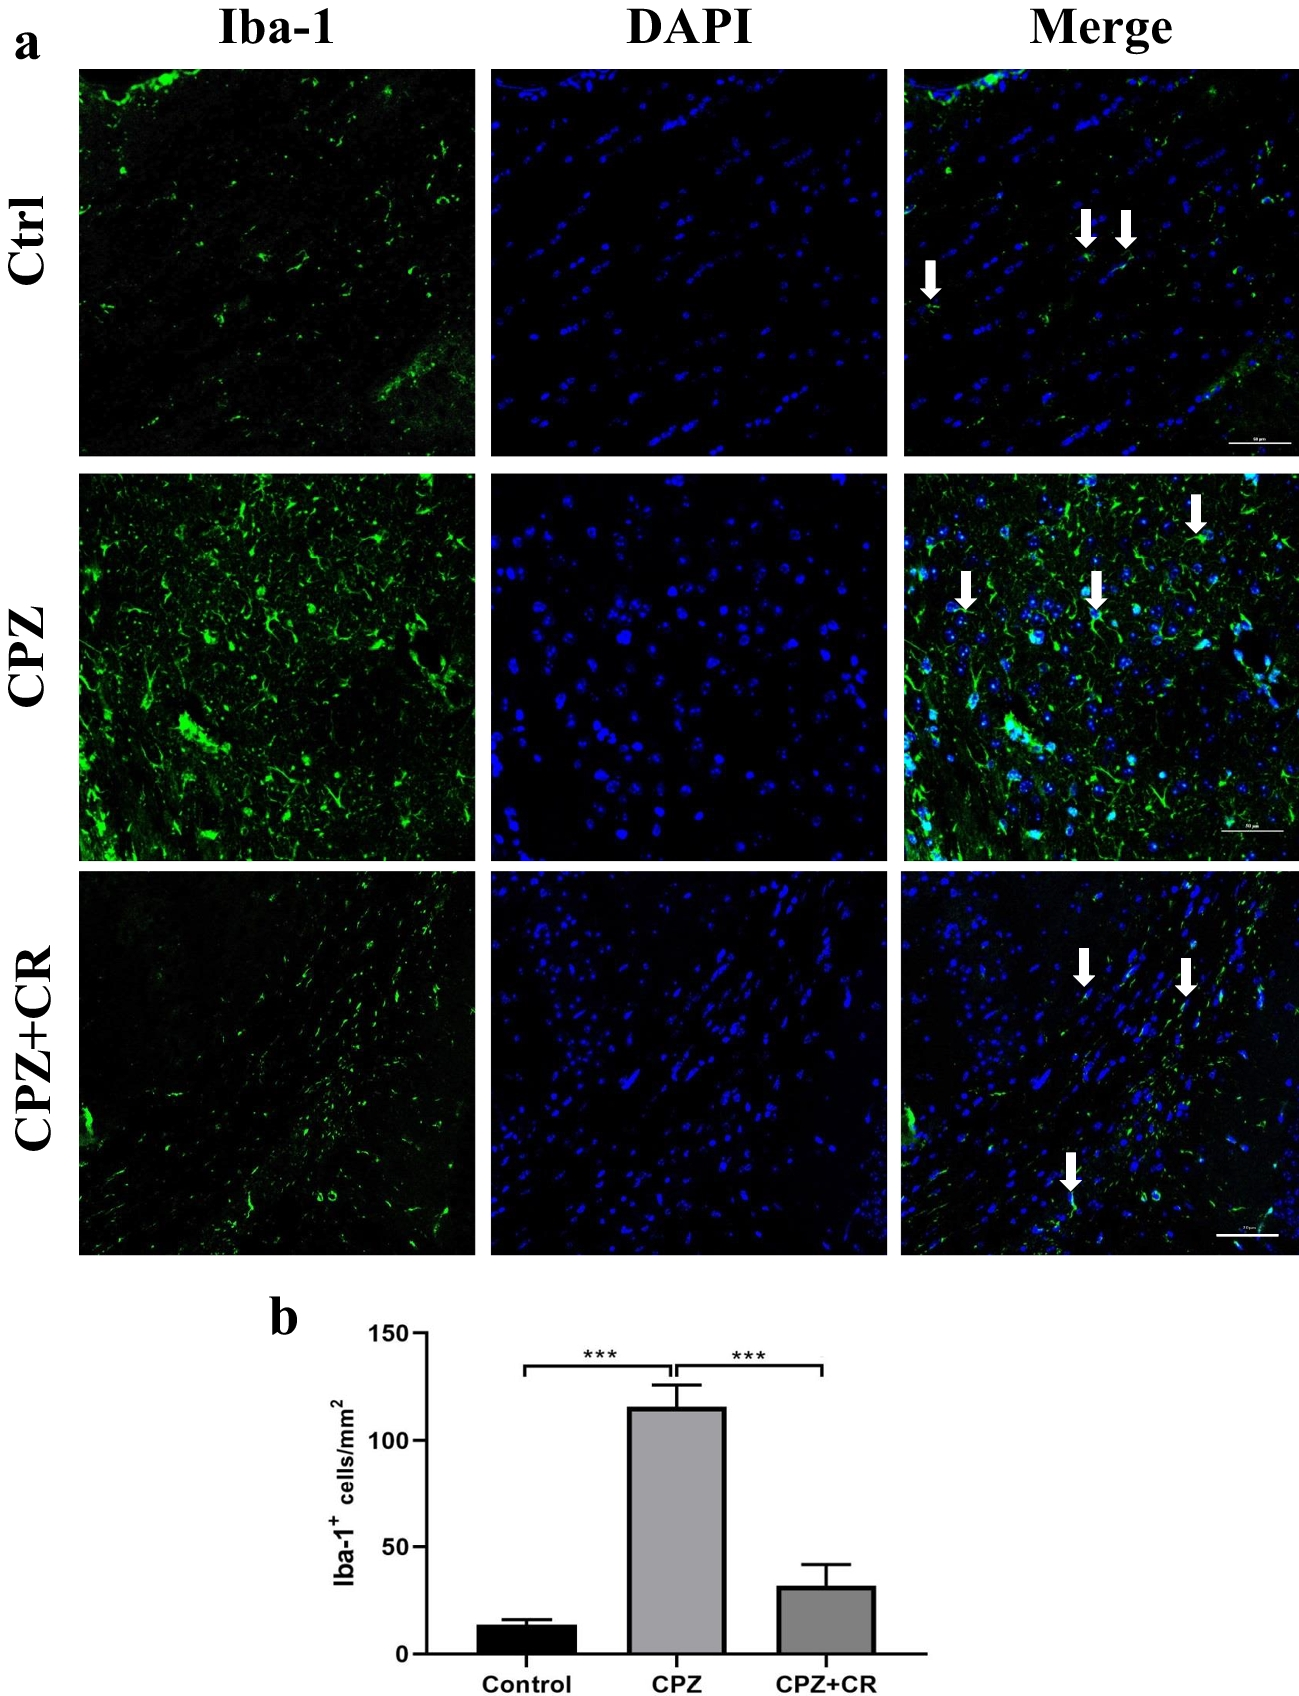 Correction to: Calorie restriction promotes remyelination in a Cuprizone-Induced demyelination mouse model of multiple sclerosis